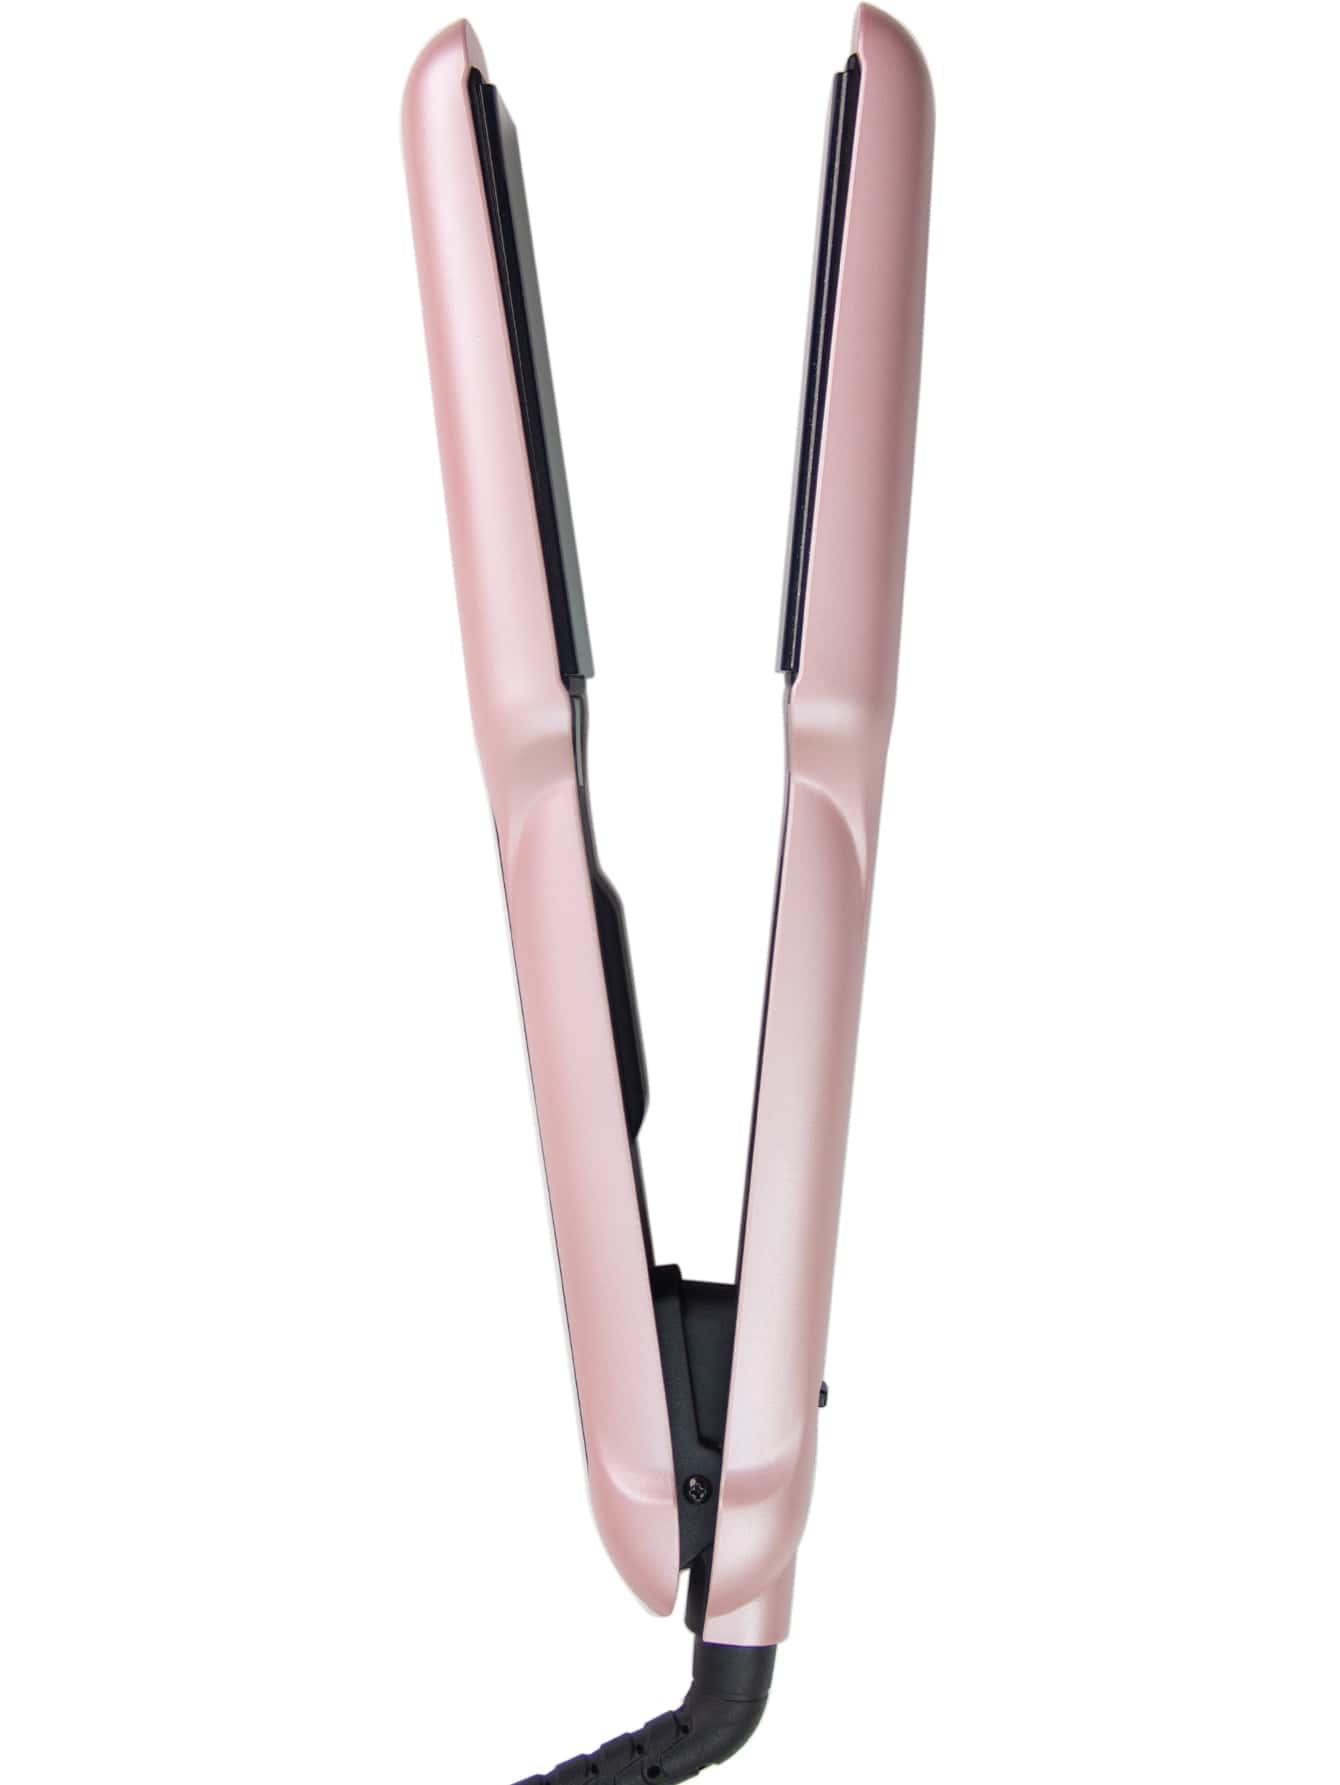 (EU)ANGENIL Argan Oil Flat Iron Curling Iron in One, Professional Portable Dual Voltage Ceramic Hair Straightener, 1.6 Inch Wide Flat Iron for Thick Hair, Fast Straightening Styling, LCD Display-Pink-2